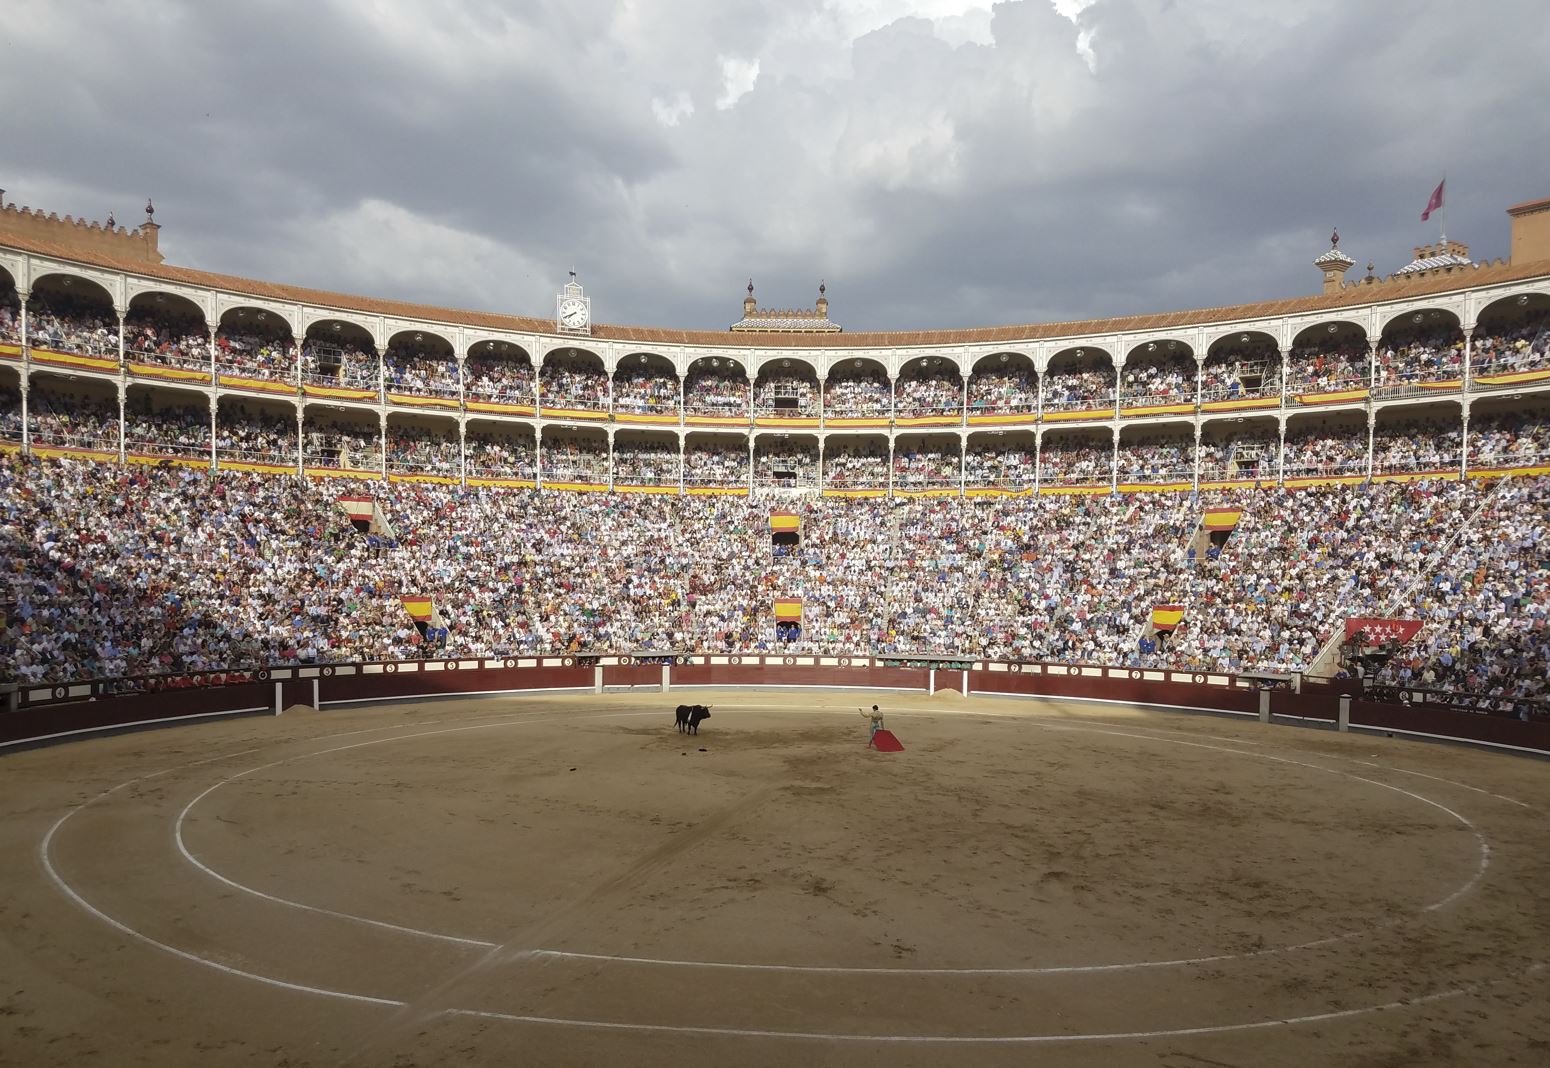 a large arena with a bull in the middle